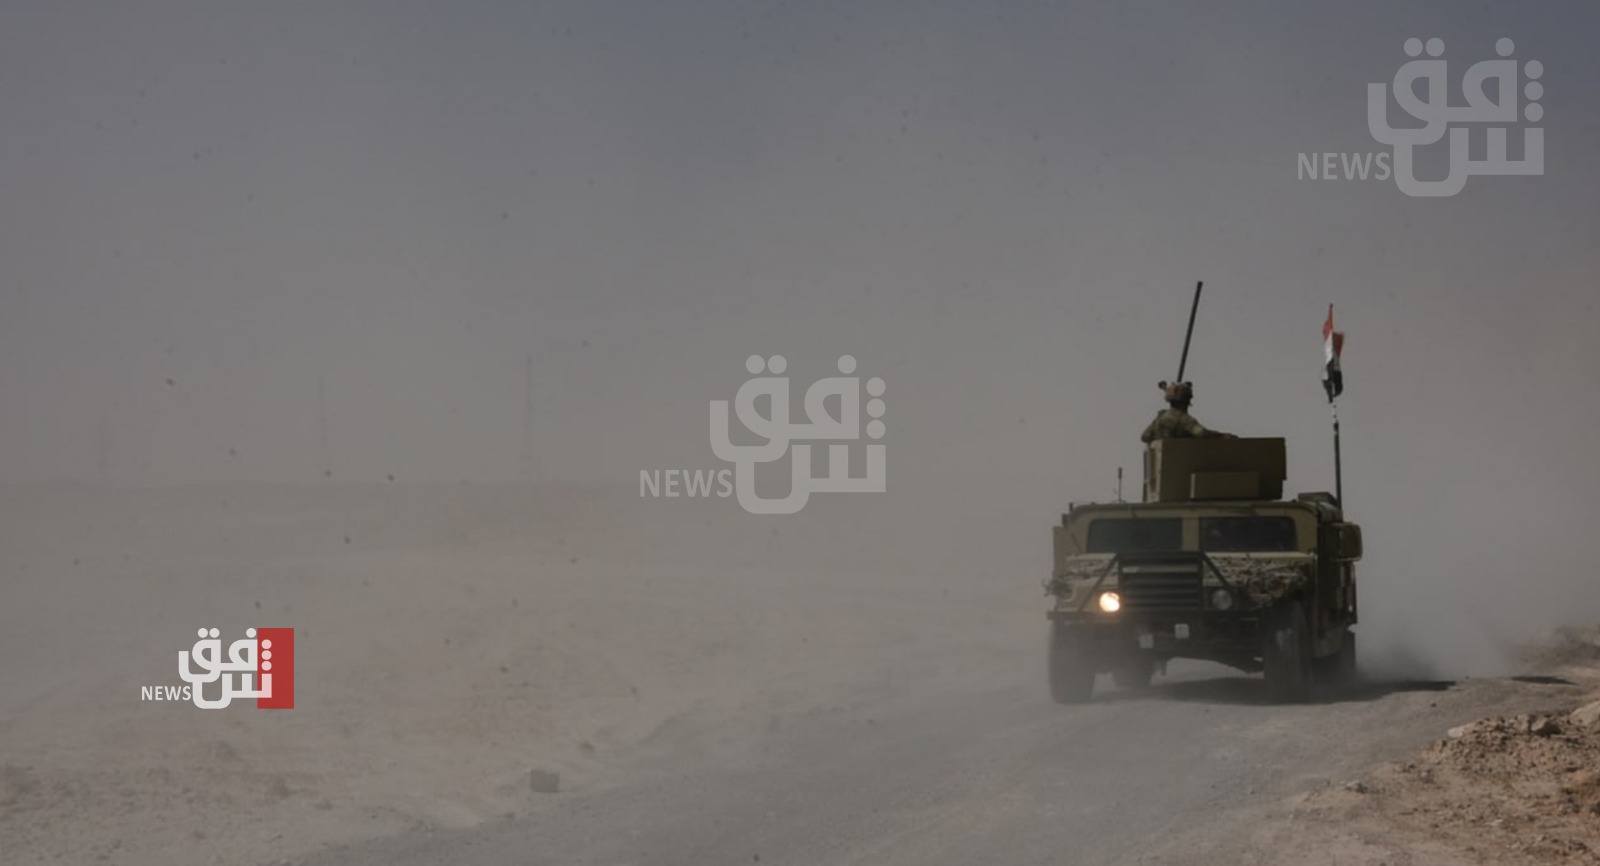 New details about ISIS attack on the Iraqi Army military points